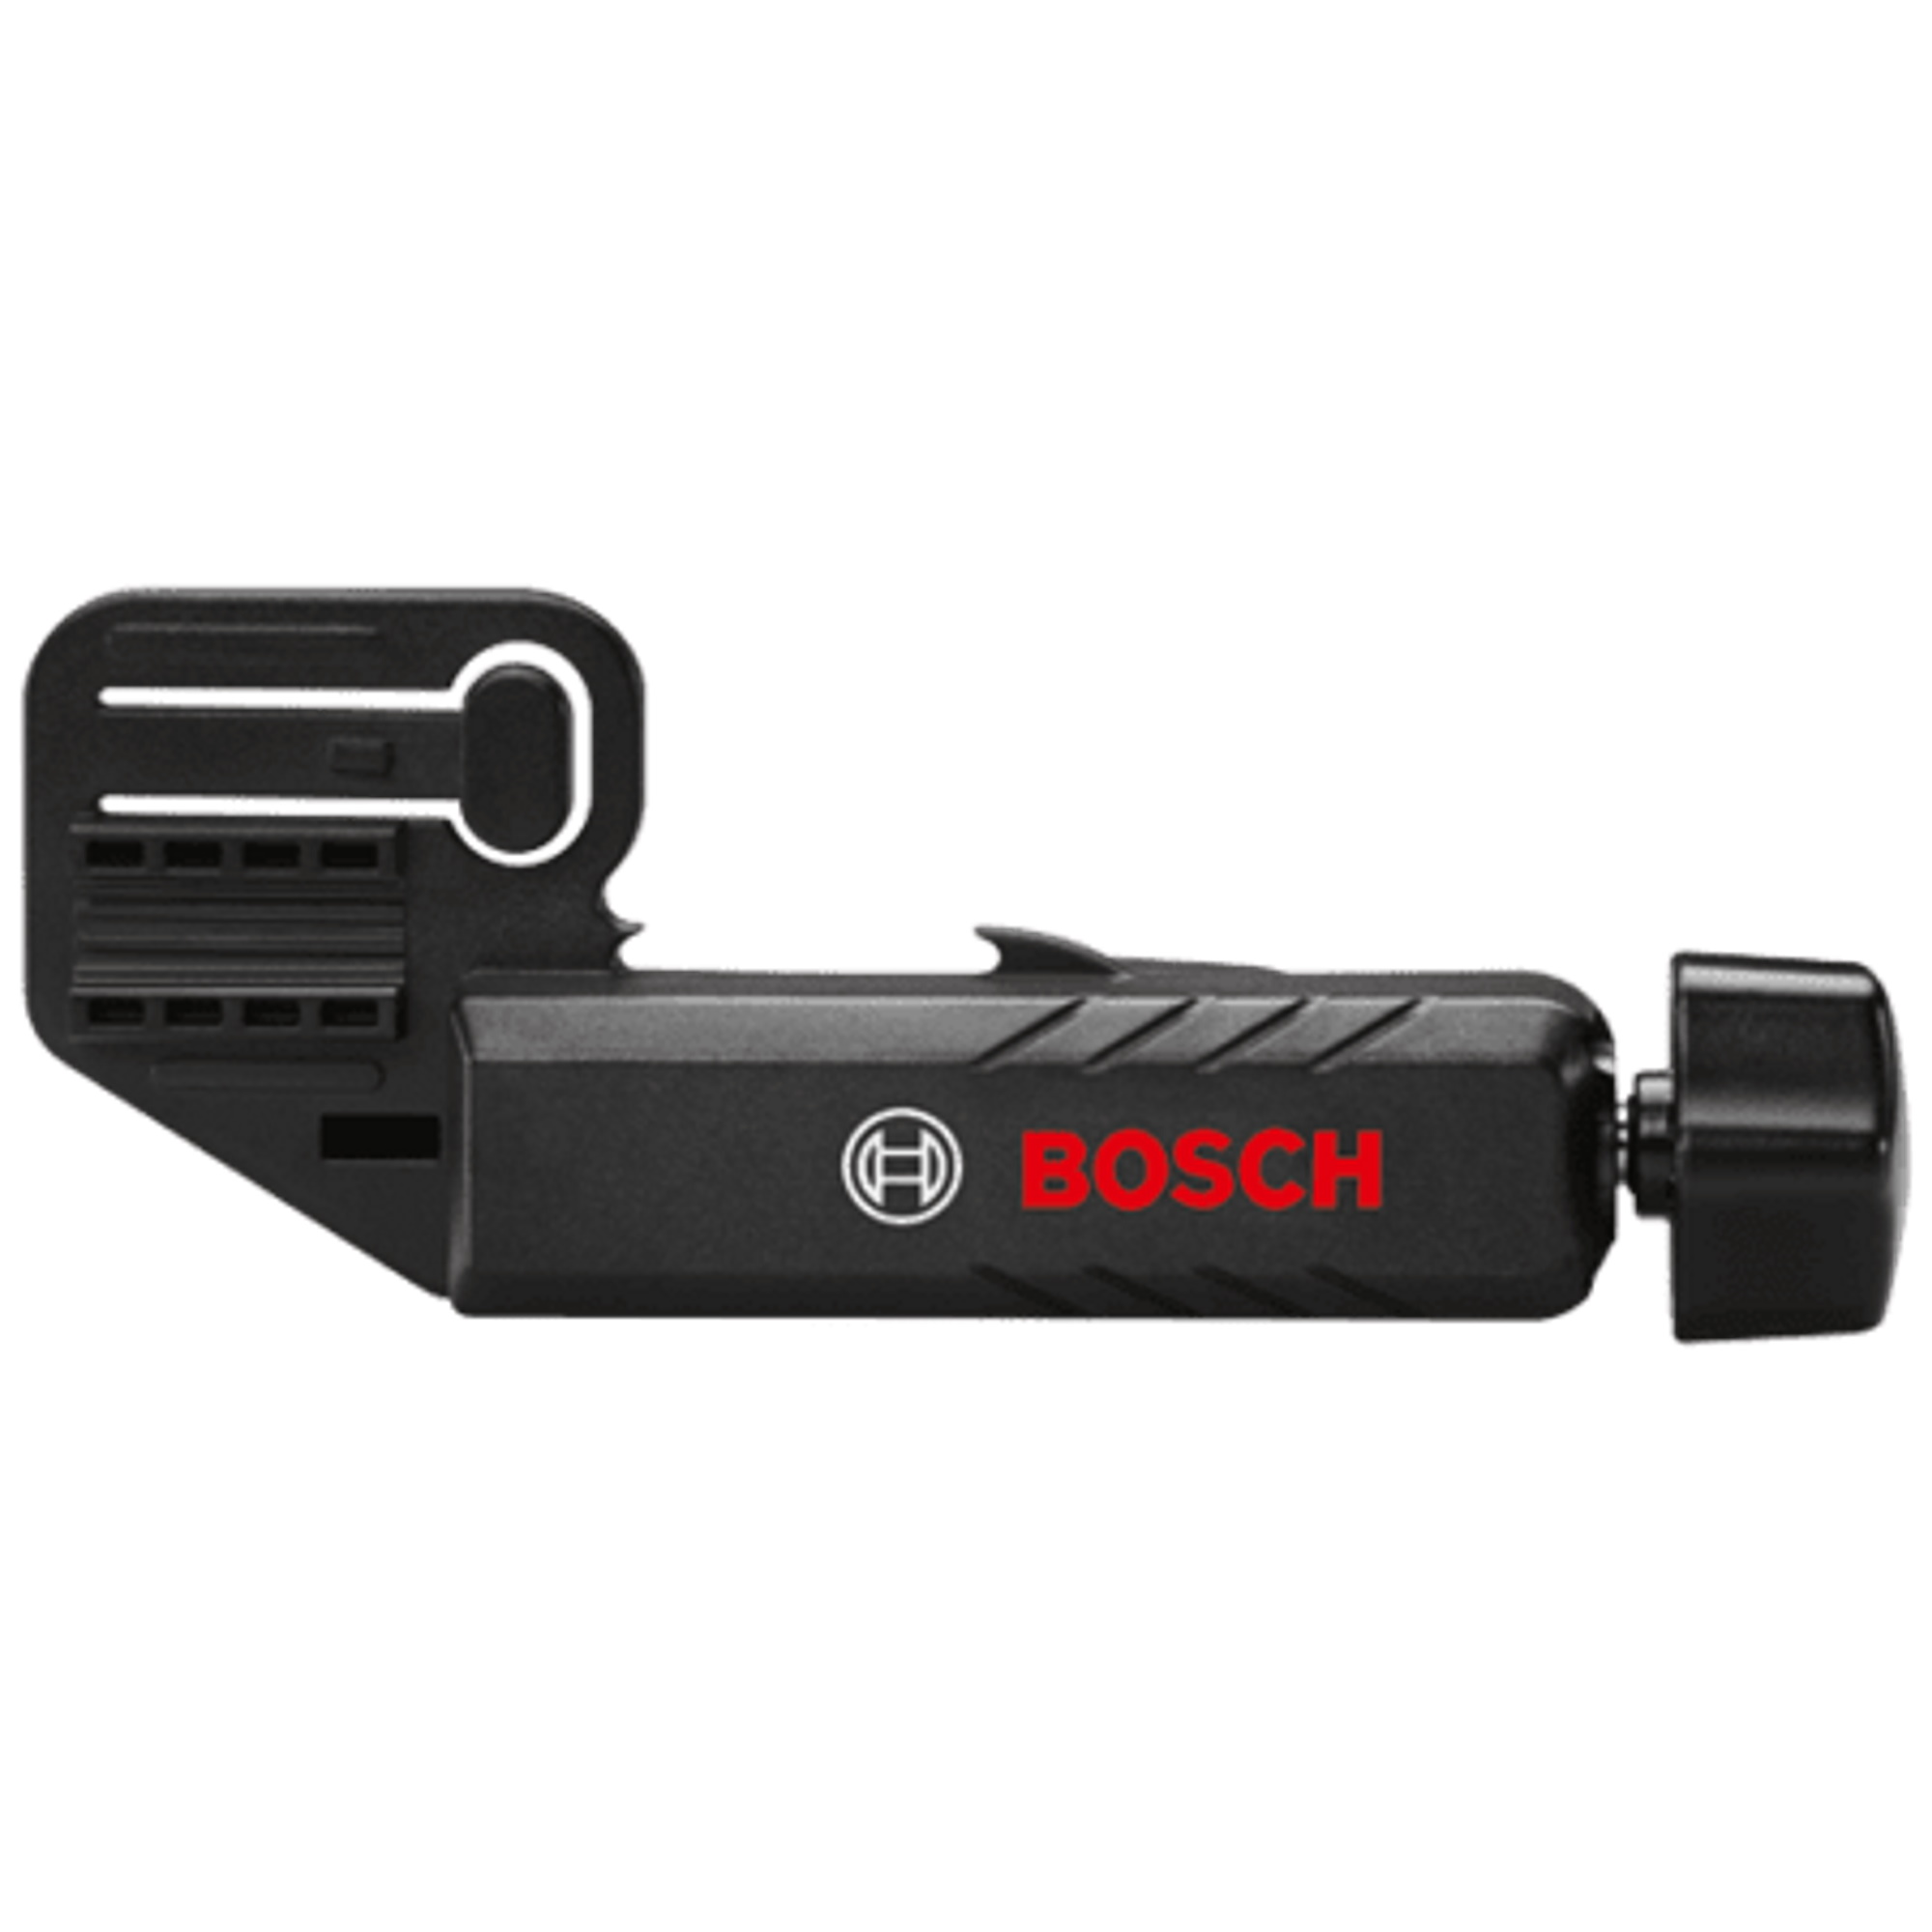 Bosch 500 ft. Red-Beam Rotary Laser Receiver